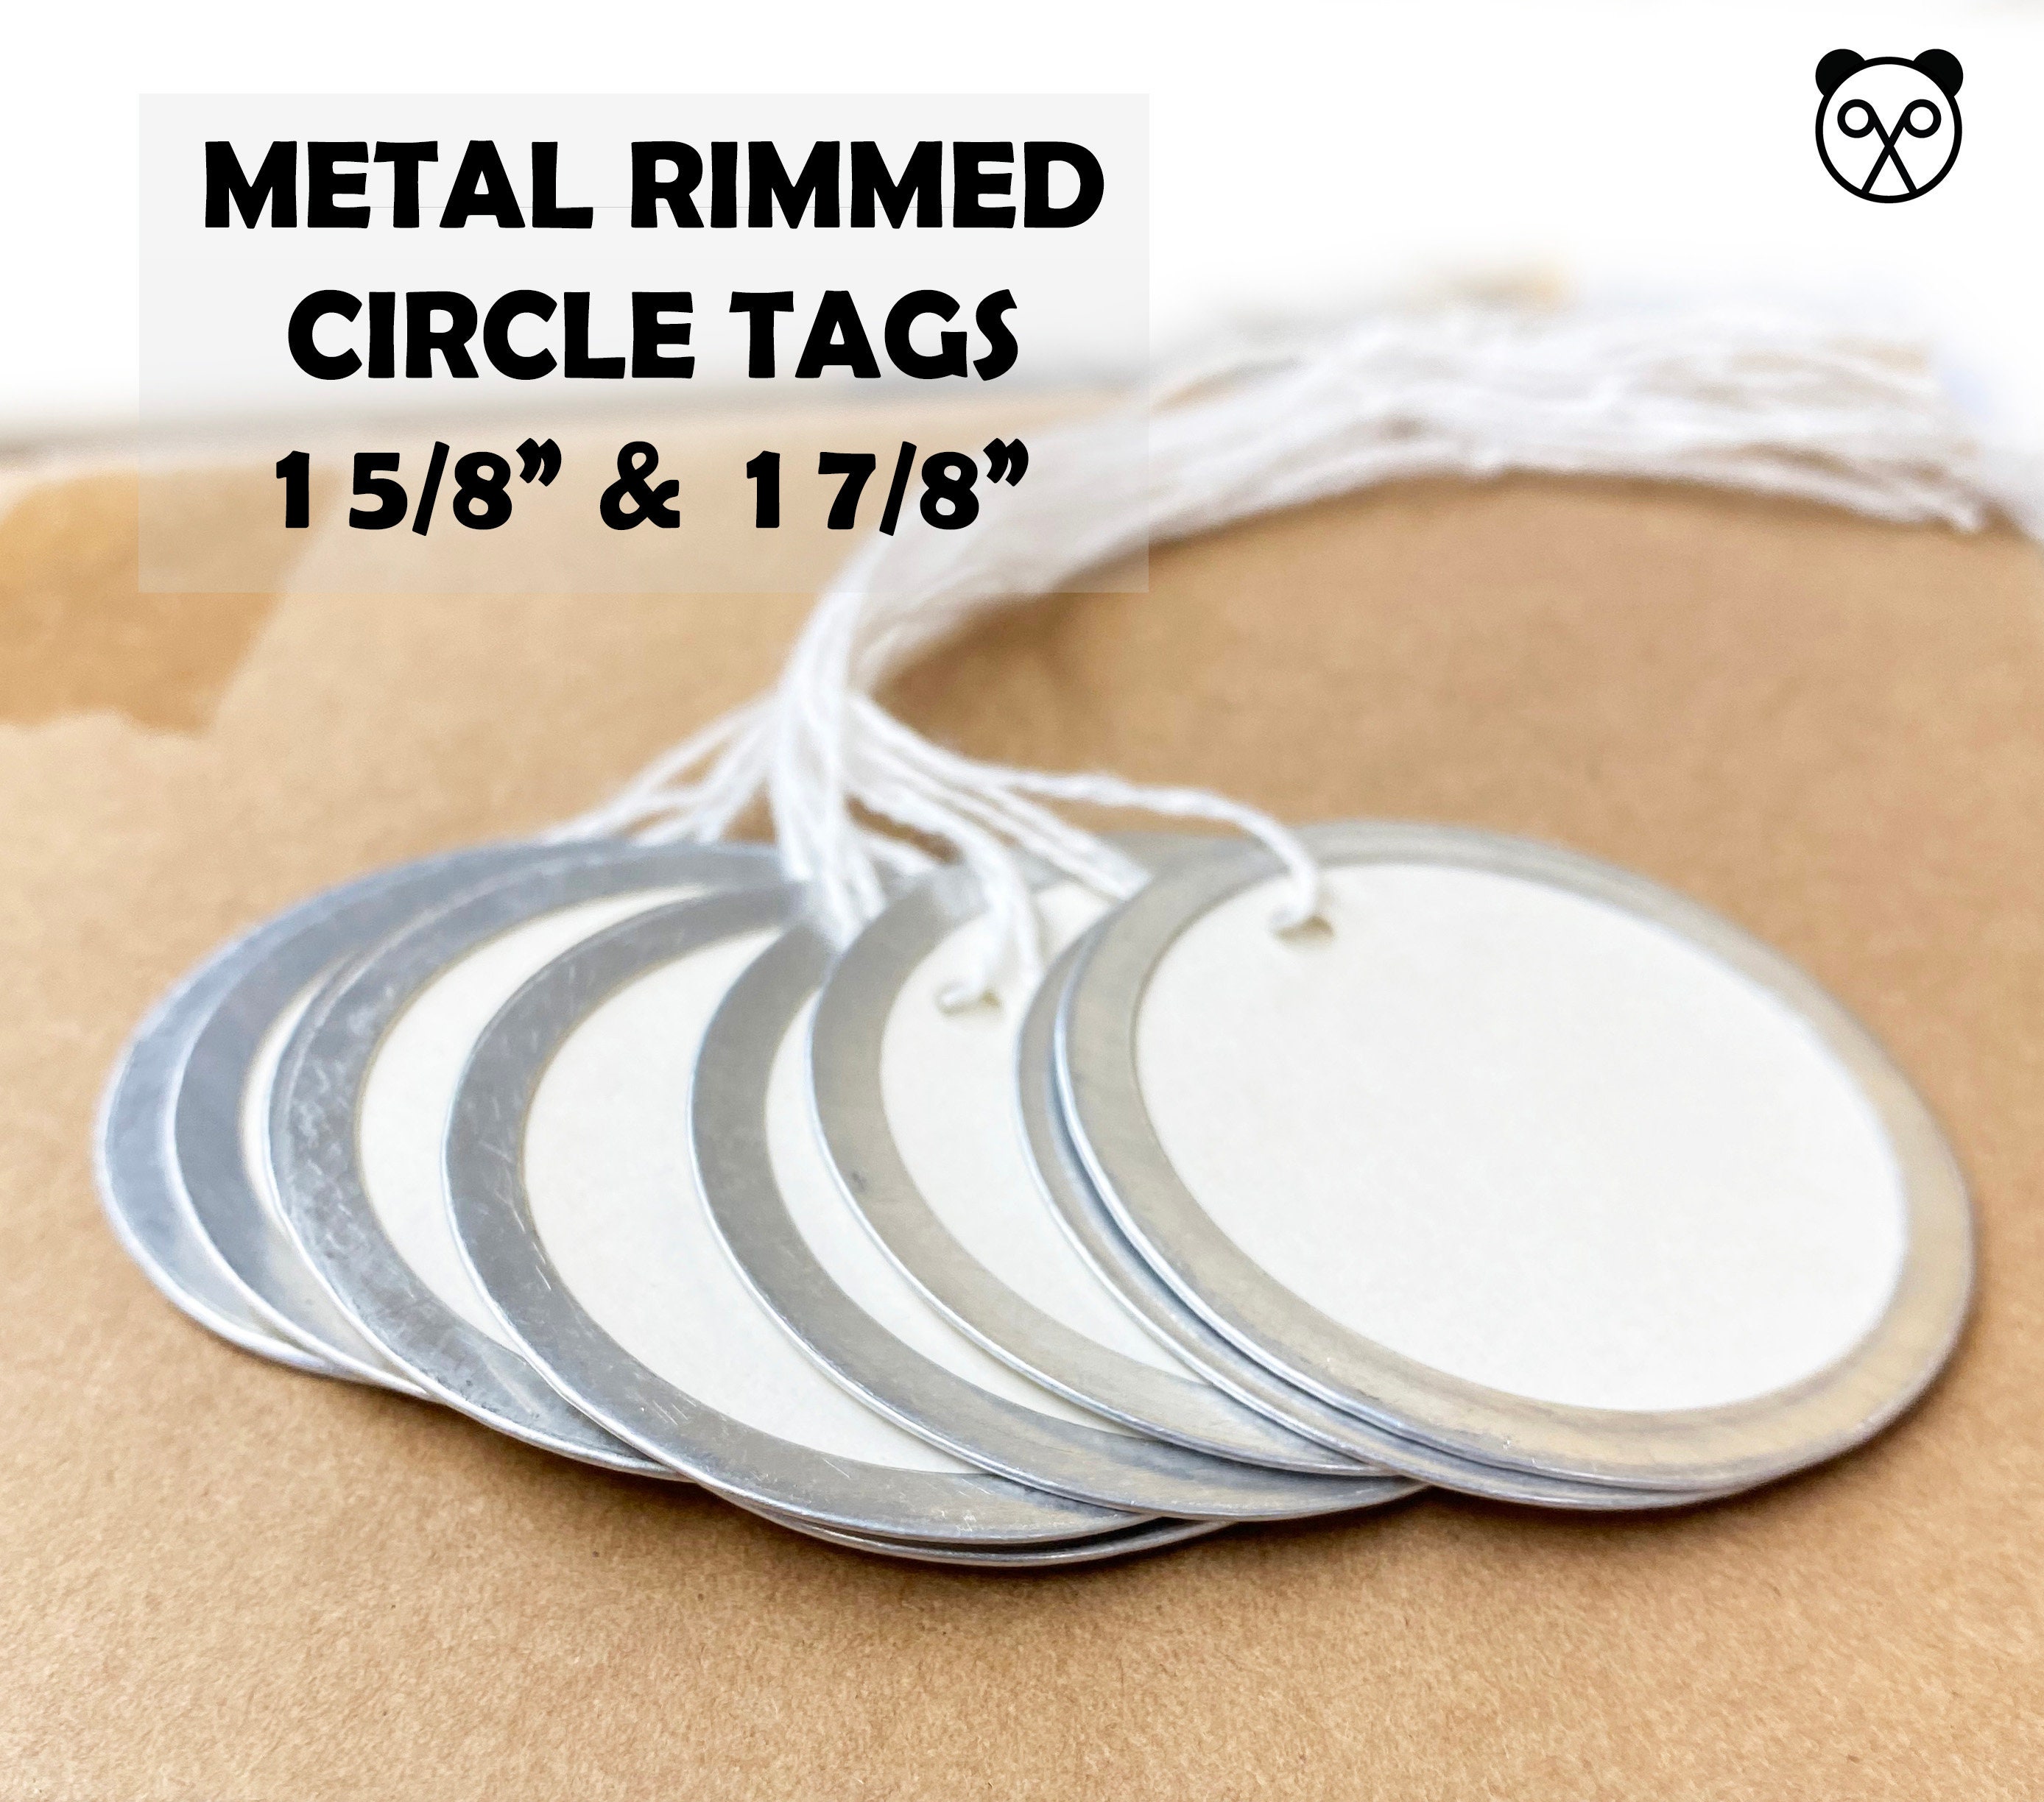 Shop for and Buy Color Paper Tags with Metal Rim 1.25 Inch Round